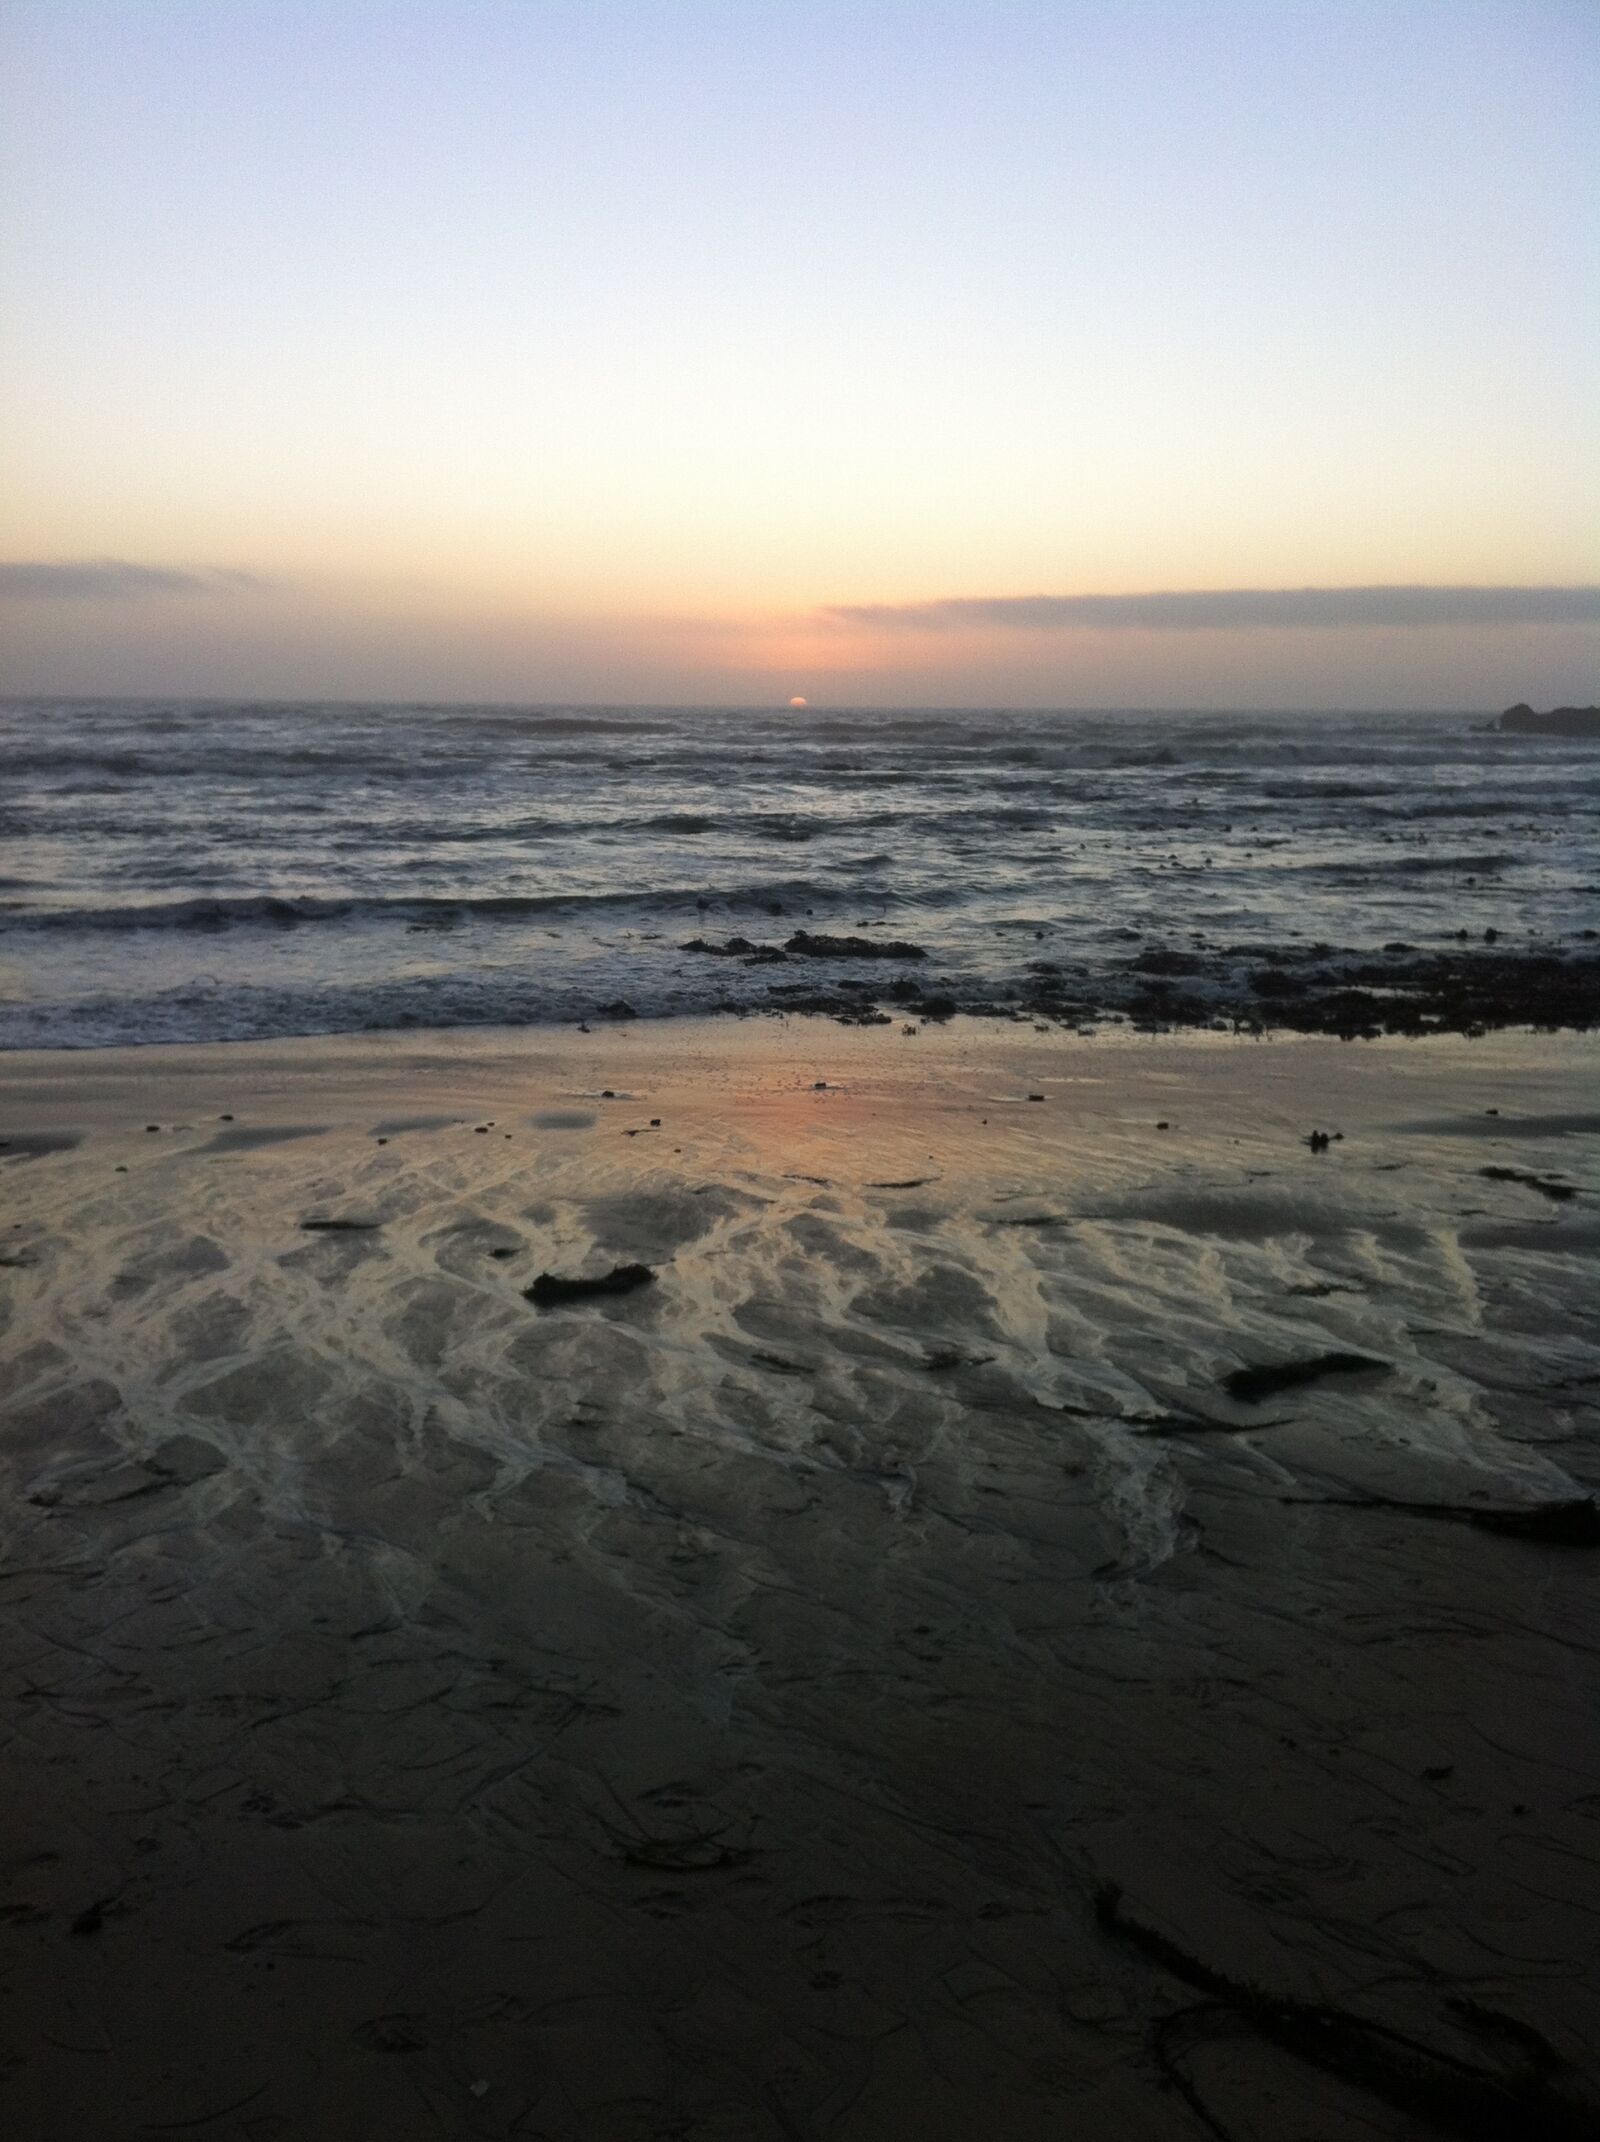 Apple iPhone 4 sample photo. Waters, beach, sunset photography